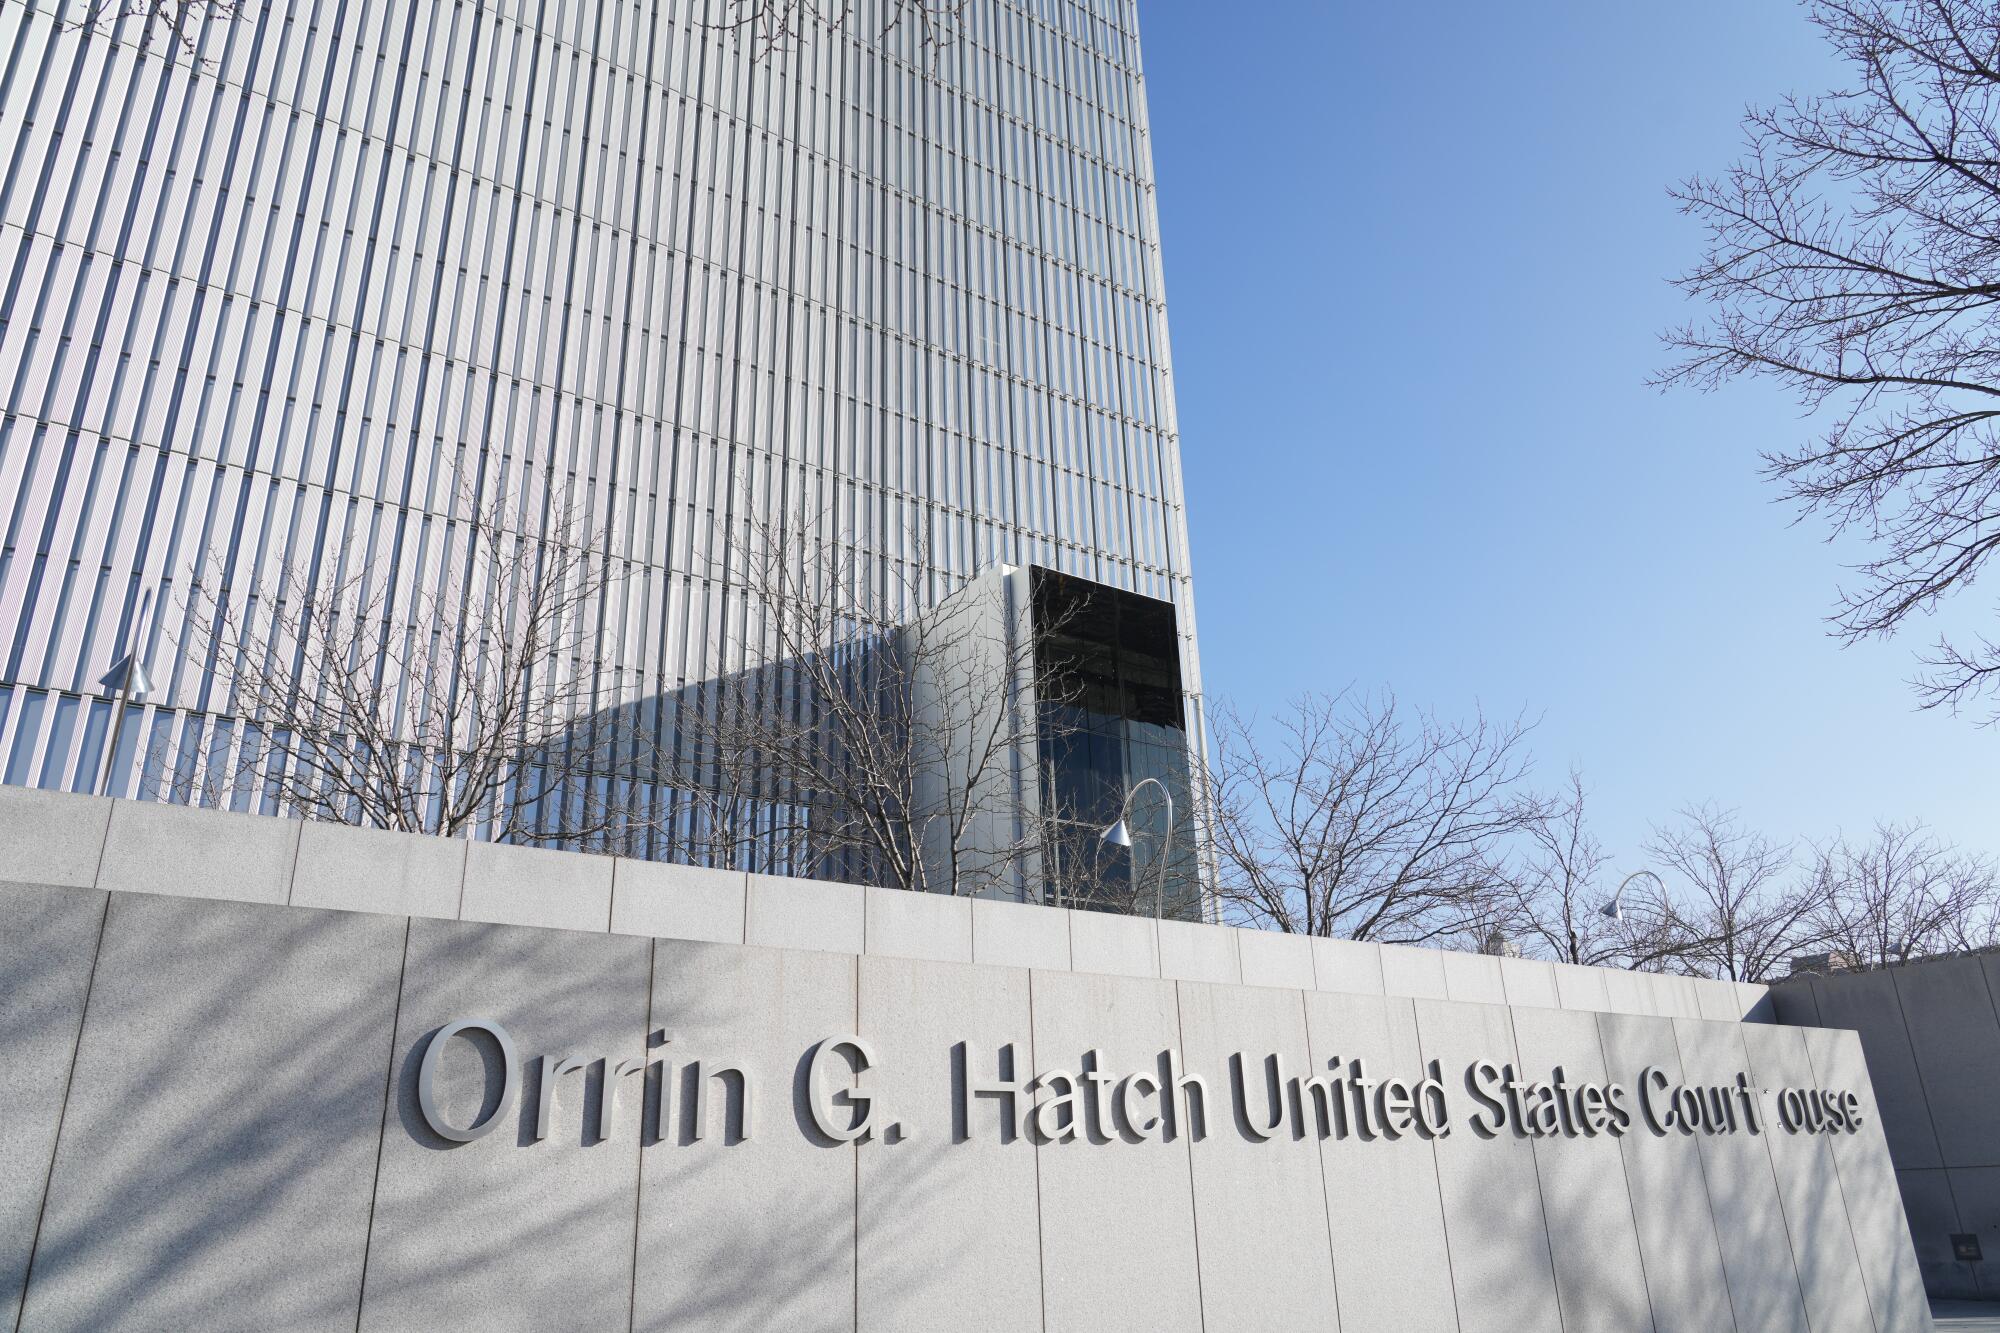 The Orrin G. Hatch federal courthouse in Salt Lake City.